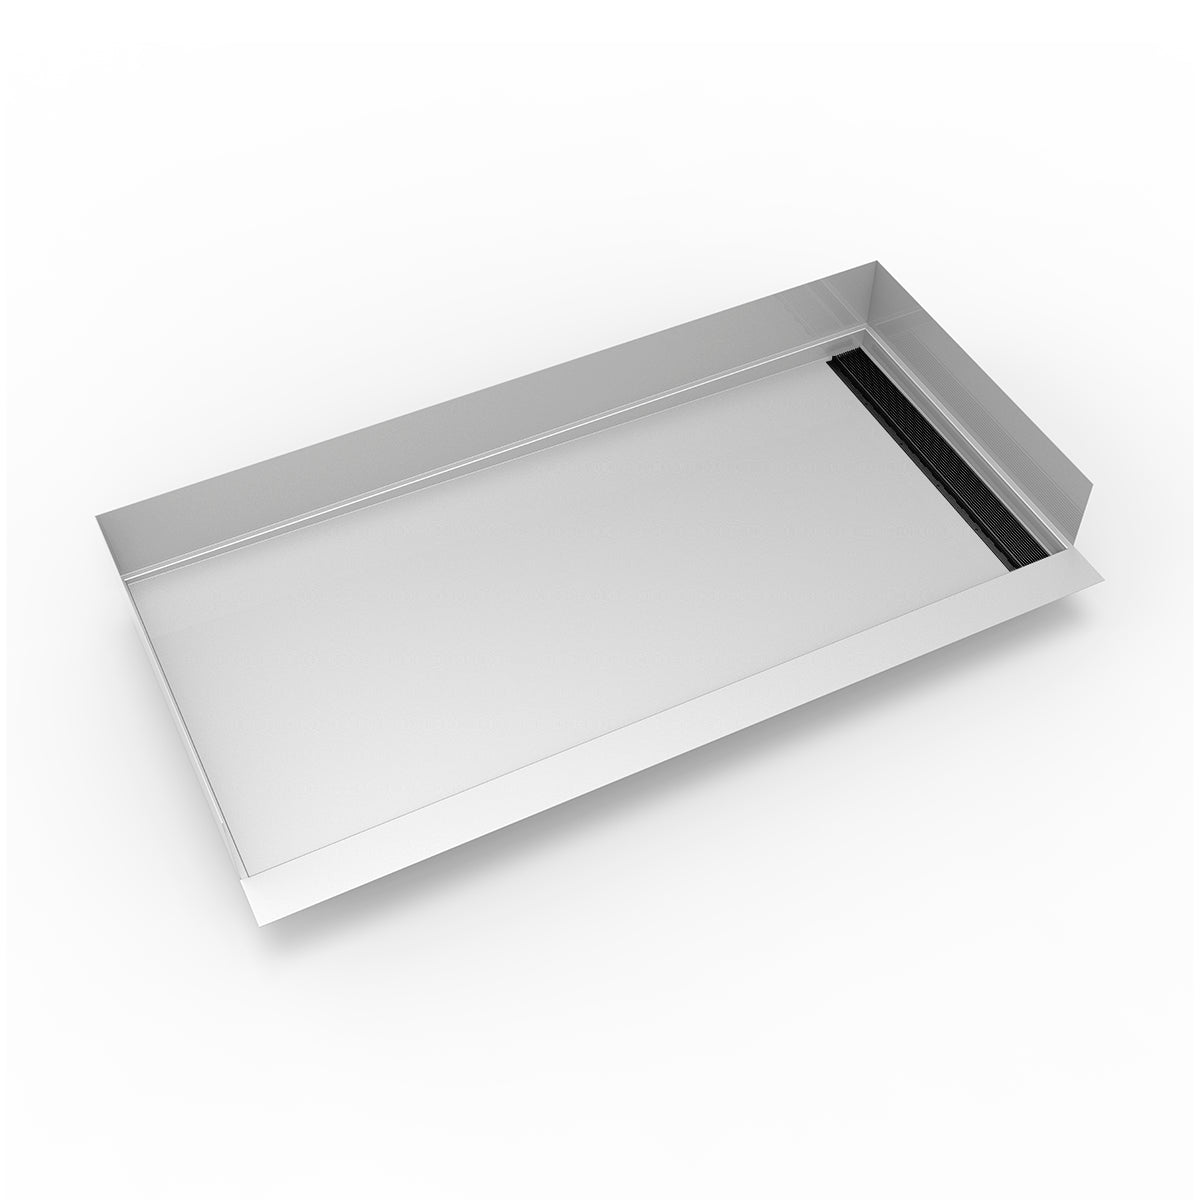 Infinity Drain 30"x 60" Curbless Stainless Steel Shower Base with Right Wall Wedge Wire Linear Drain location